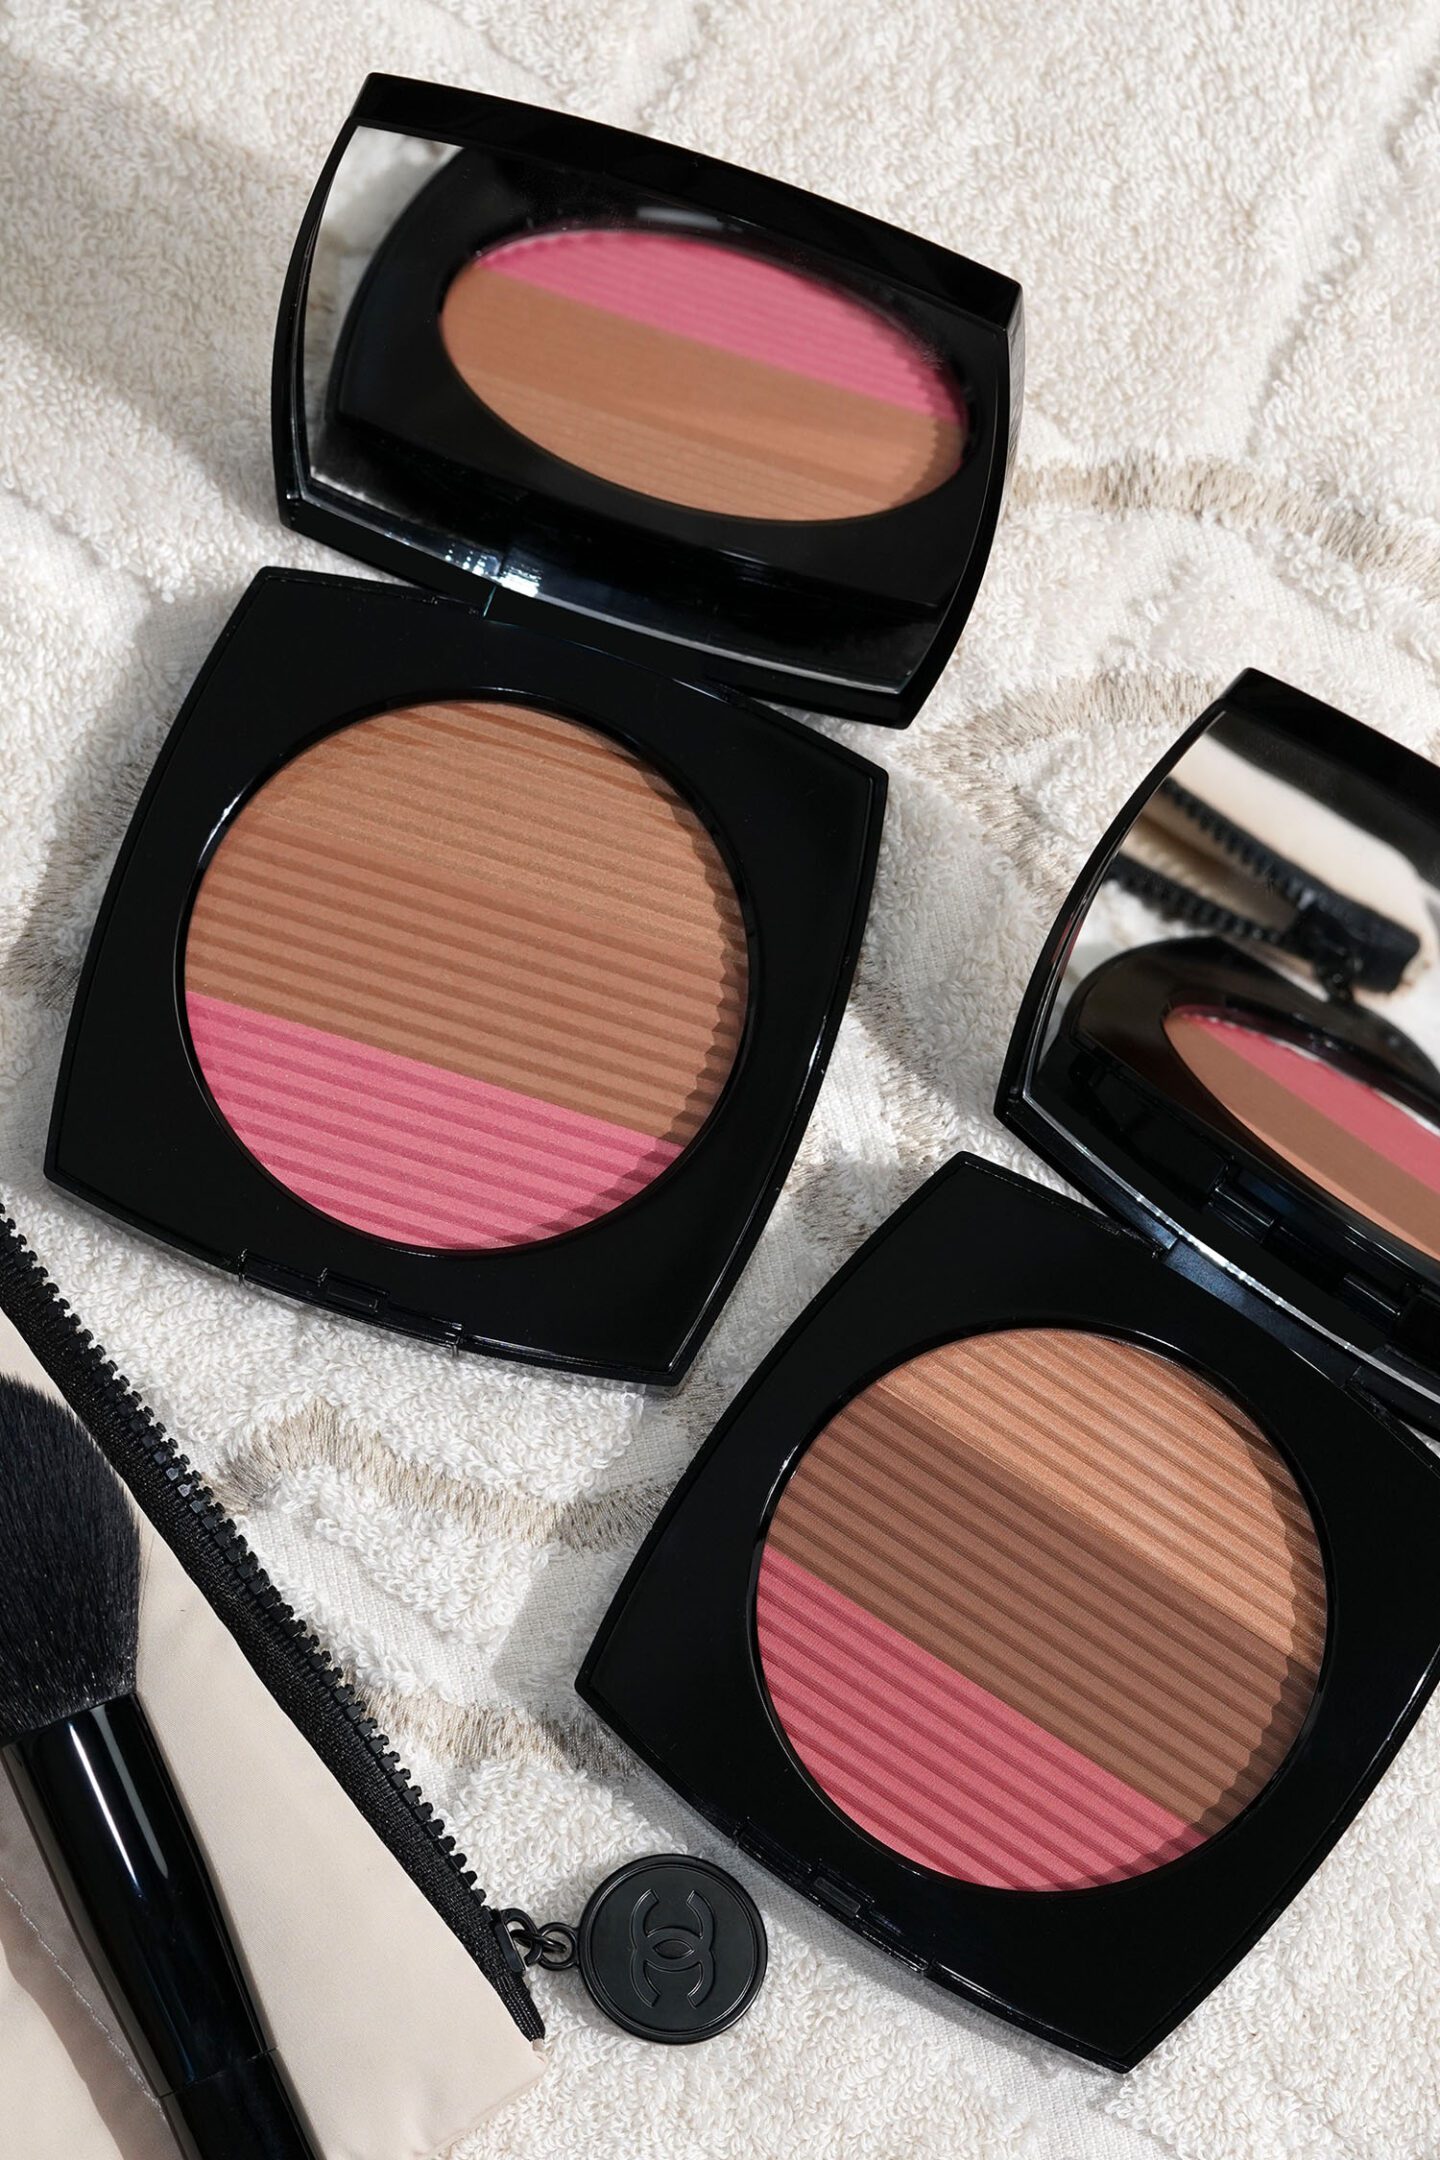 Chanel Les Beiges Medium Rosegold vs Deep Rosegold Bronzer 2024 review and swatches new bronzers via The Beauty Lookbook